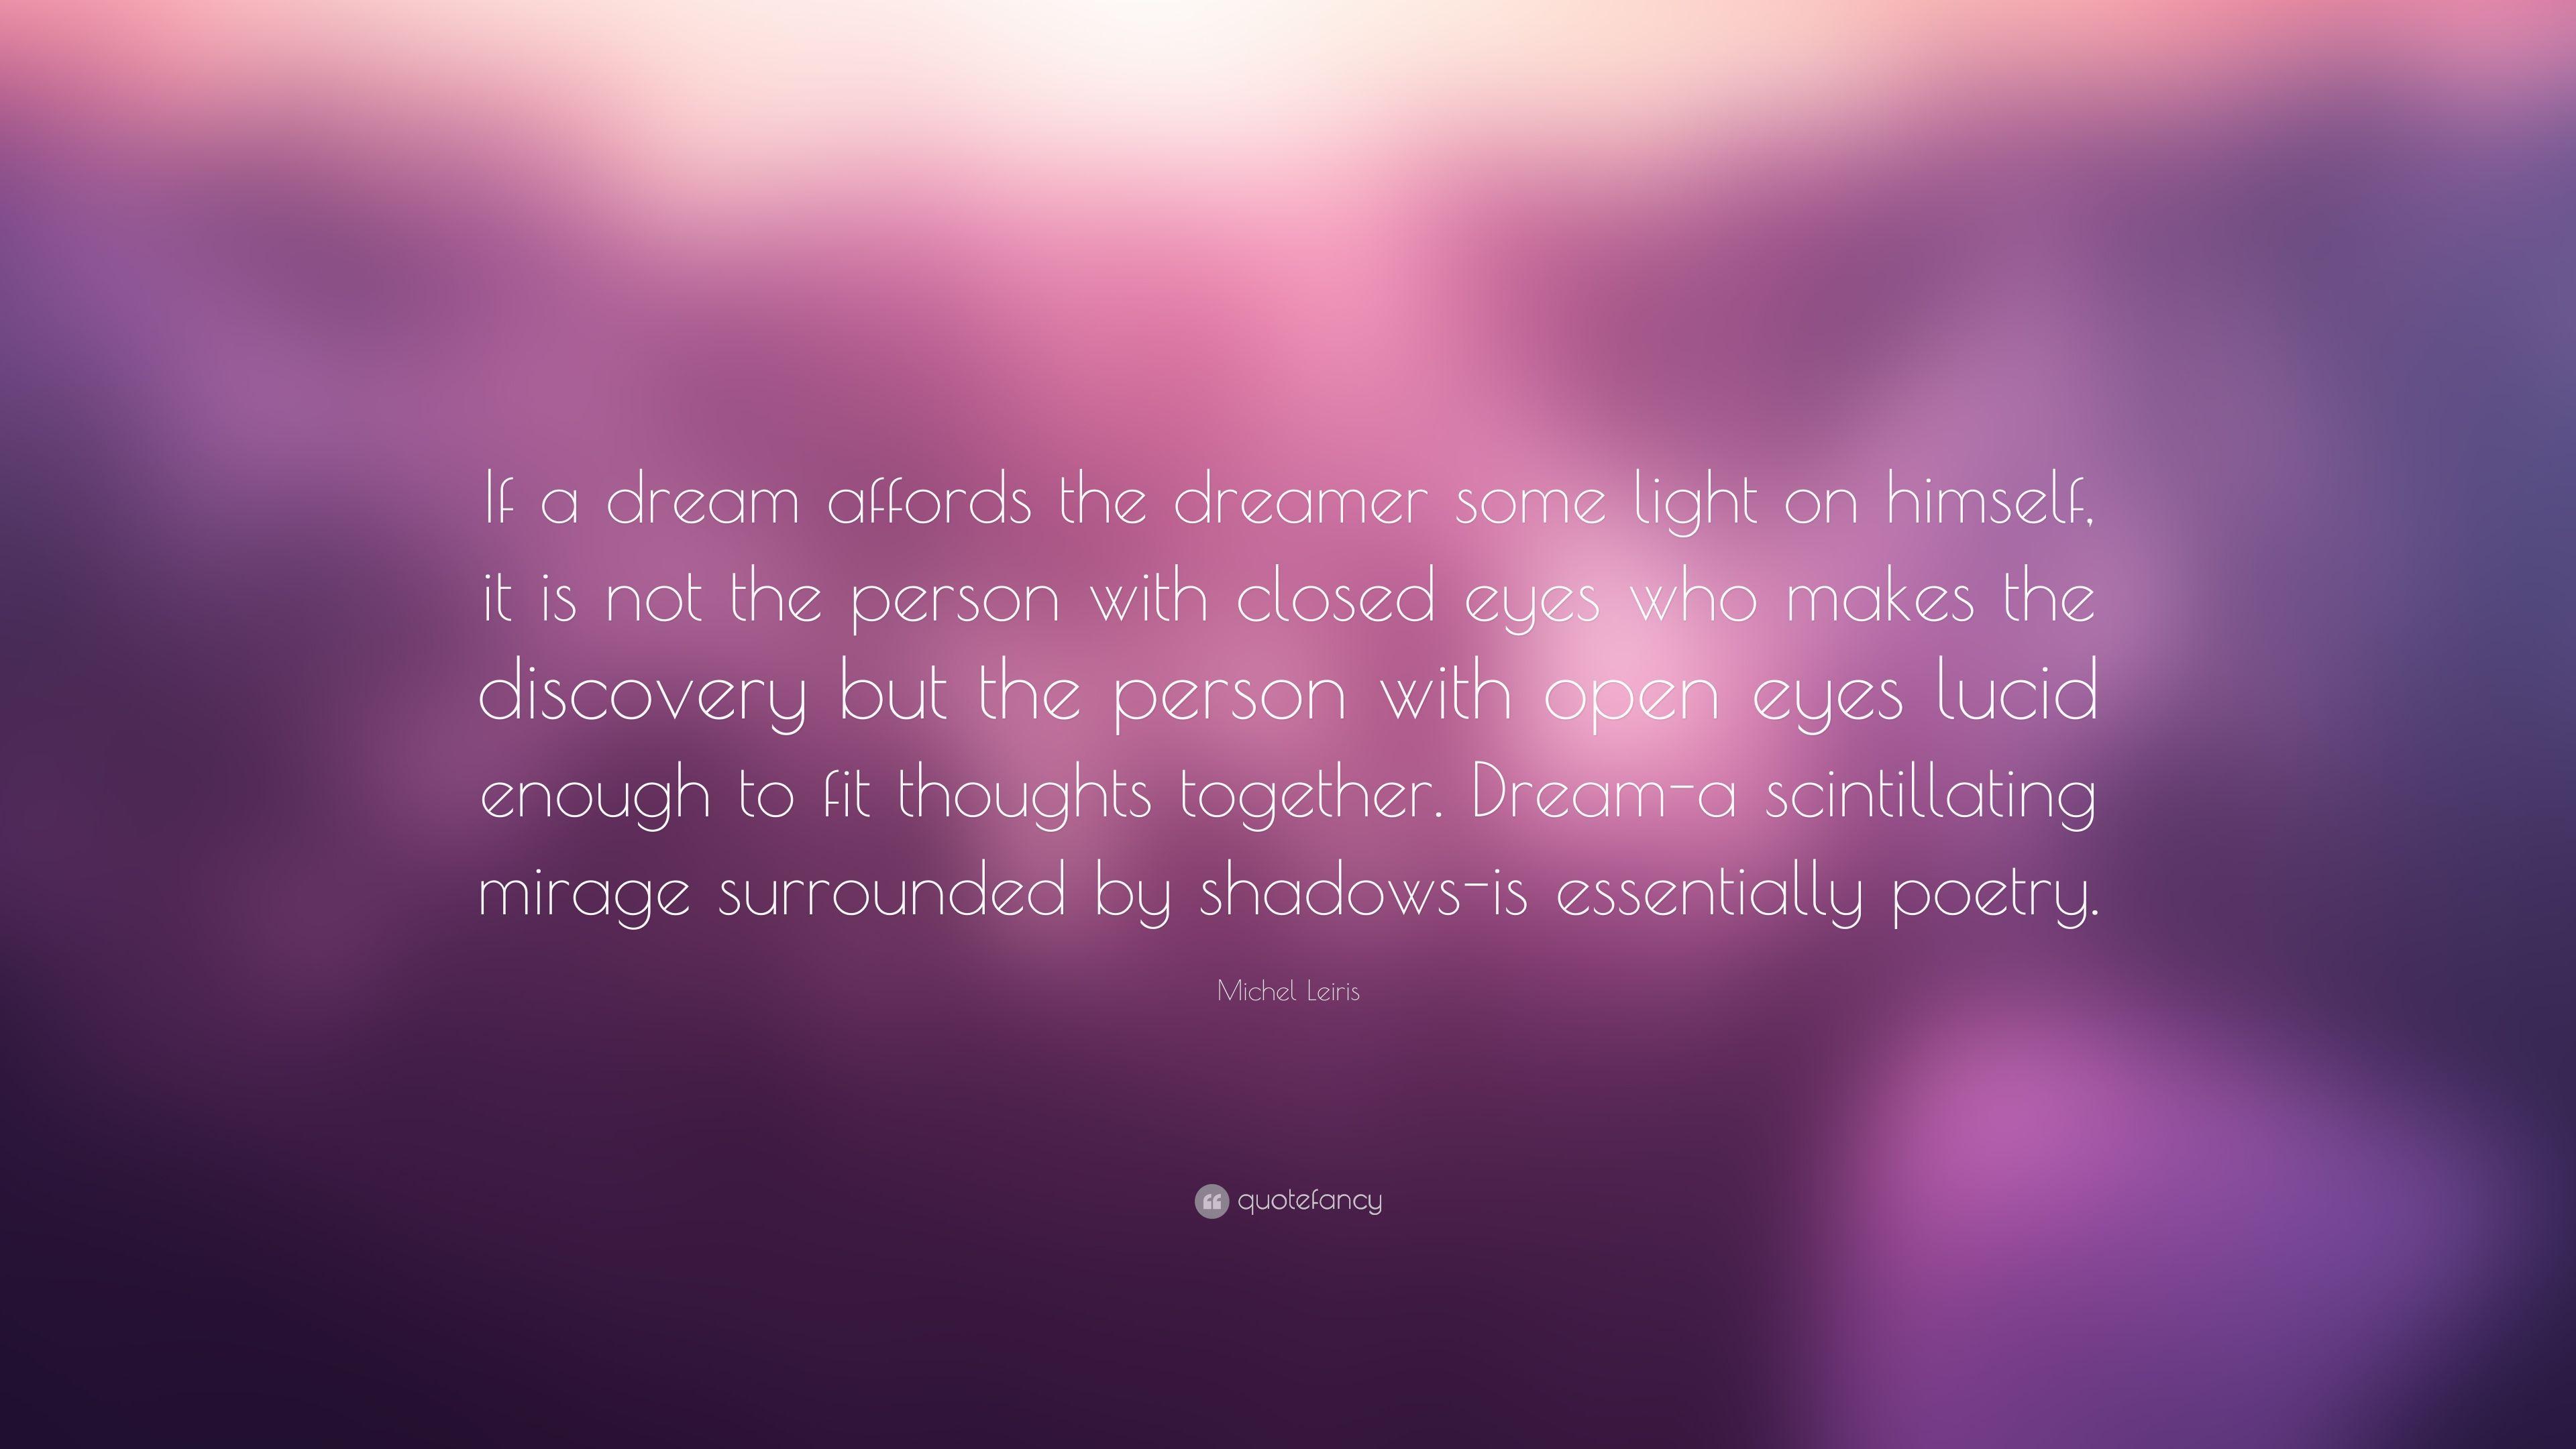 Michel Leiris Quote: “If a dream affords the dreamer some light